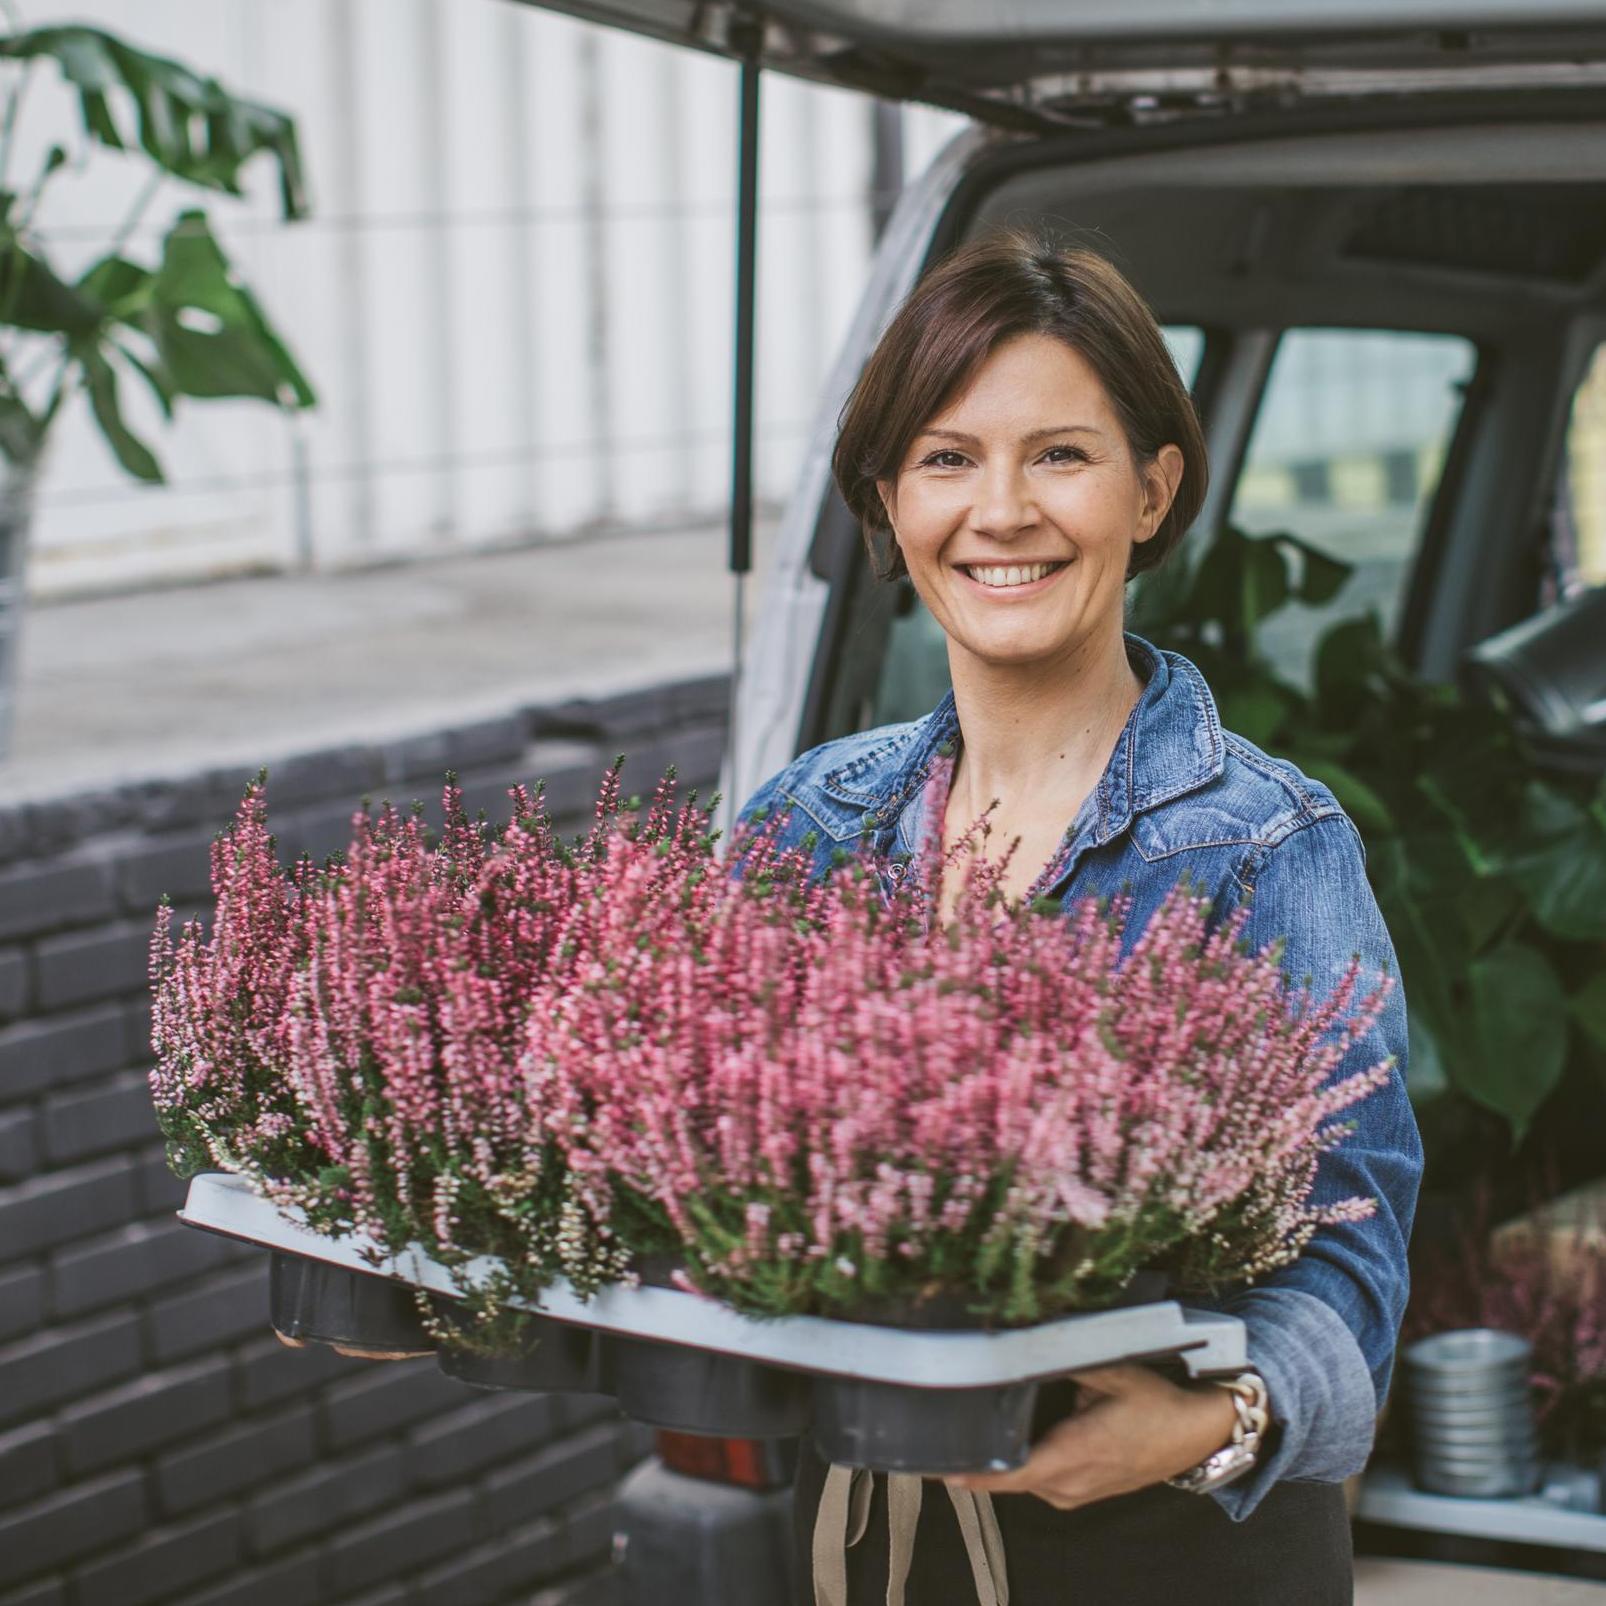 Smiling woman loading car trunk filled with different type of flowers.